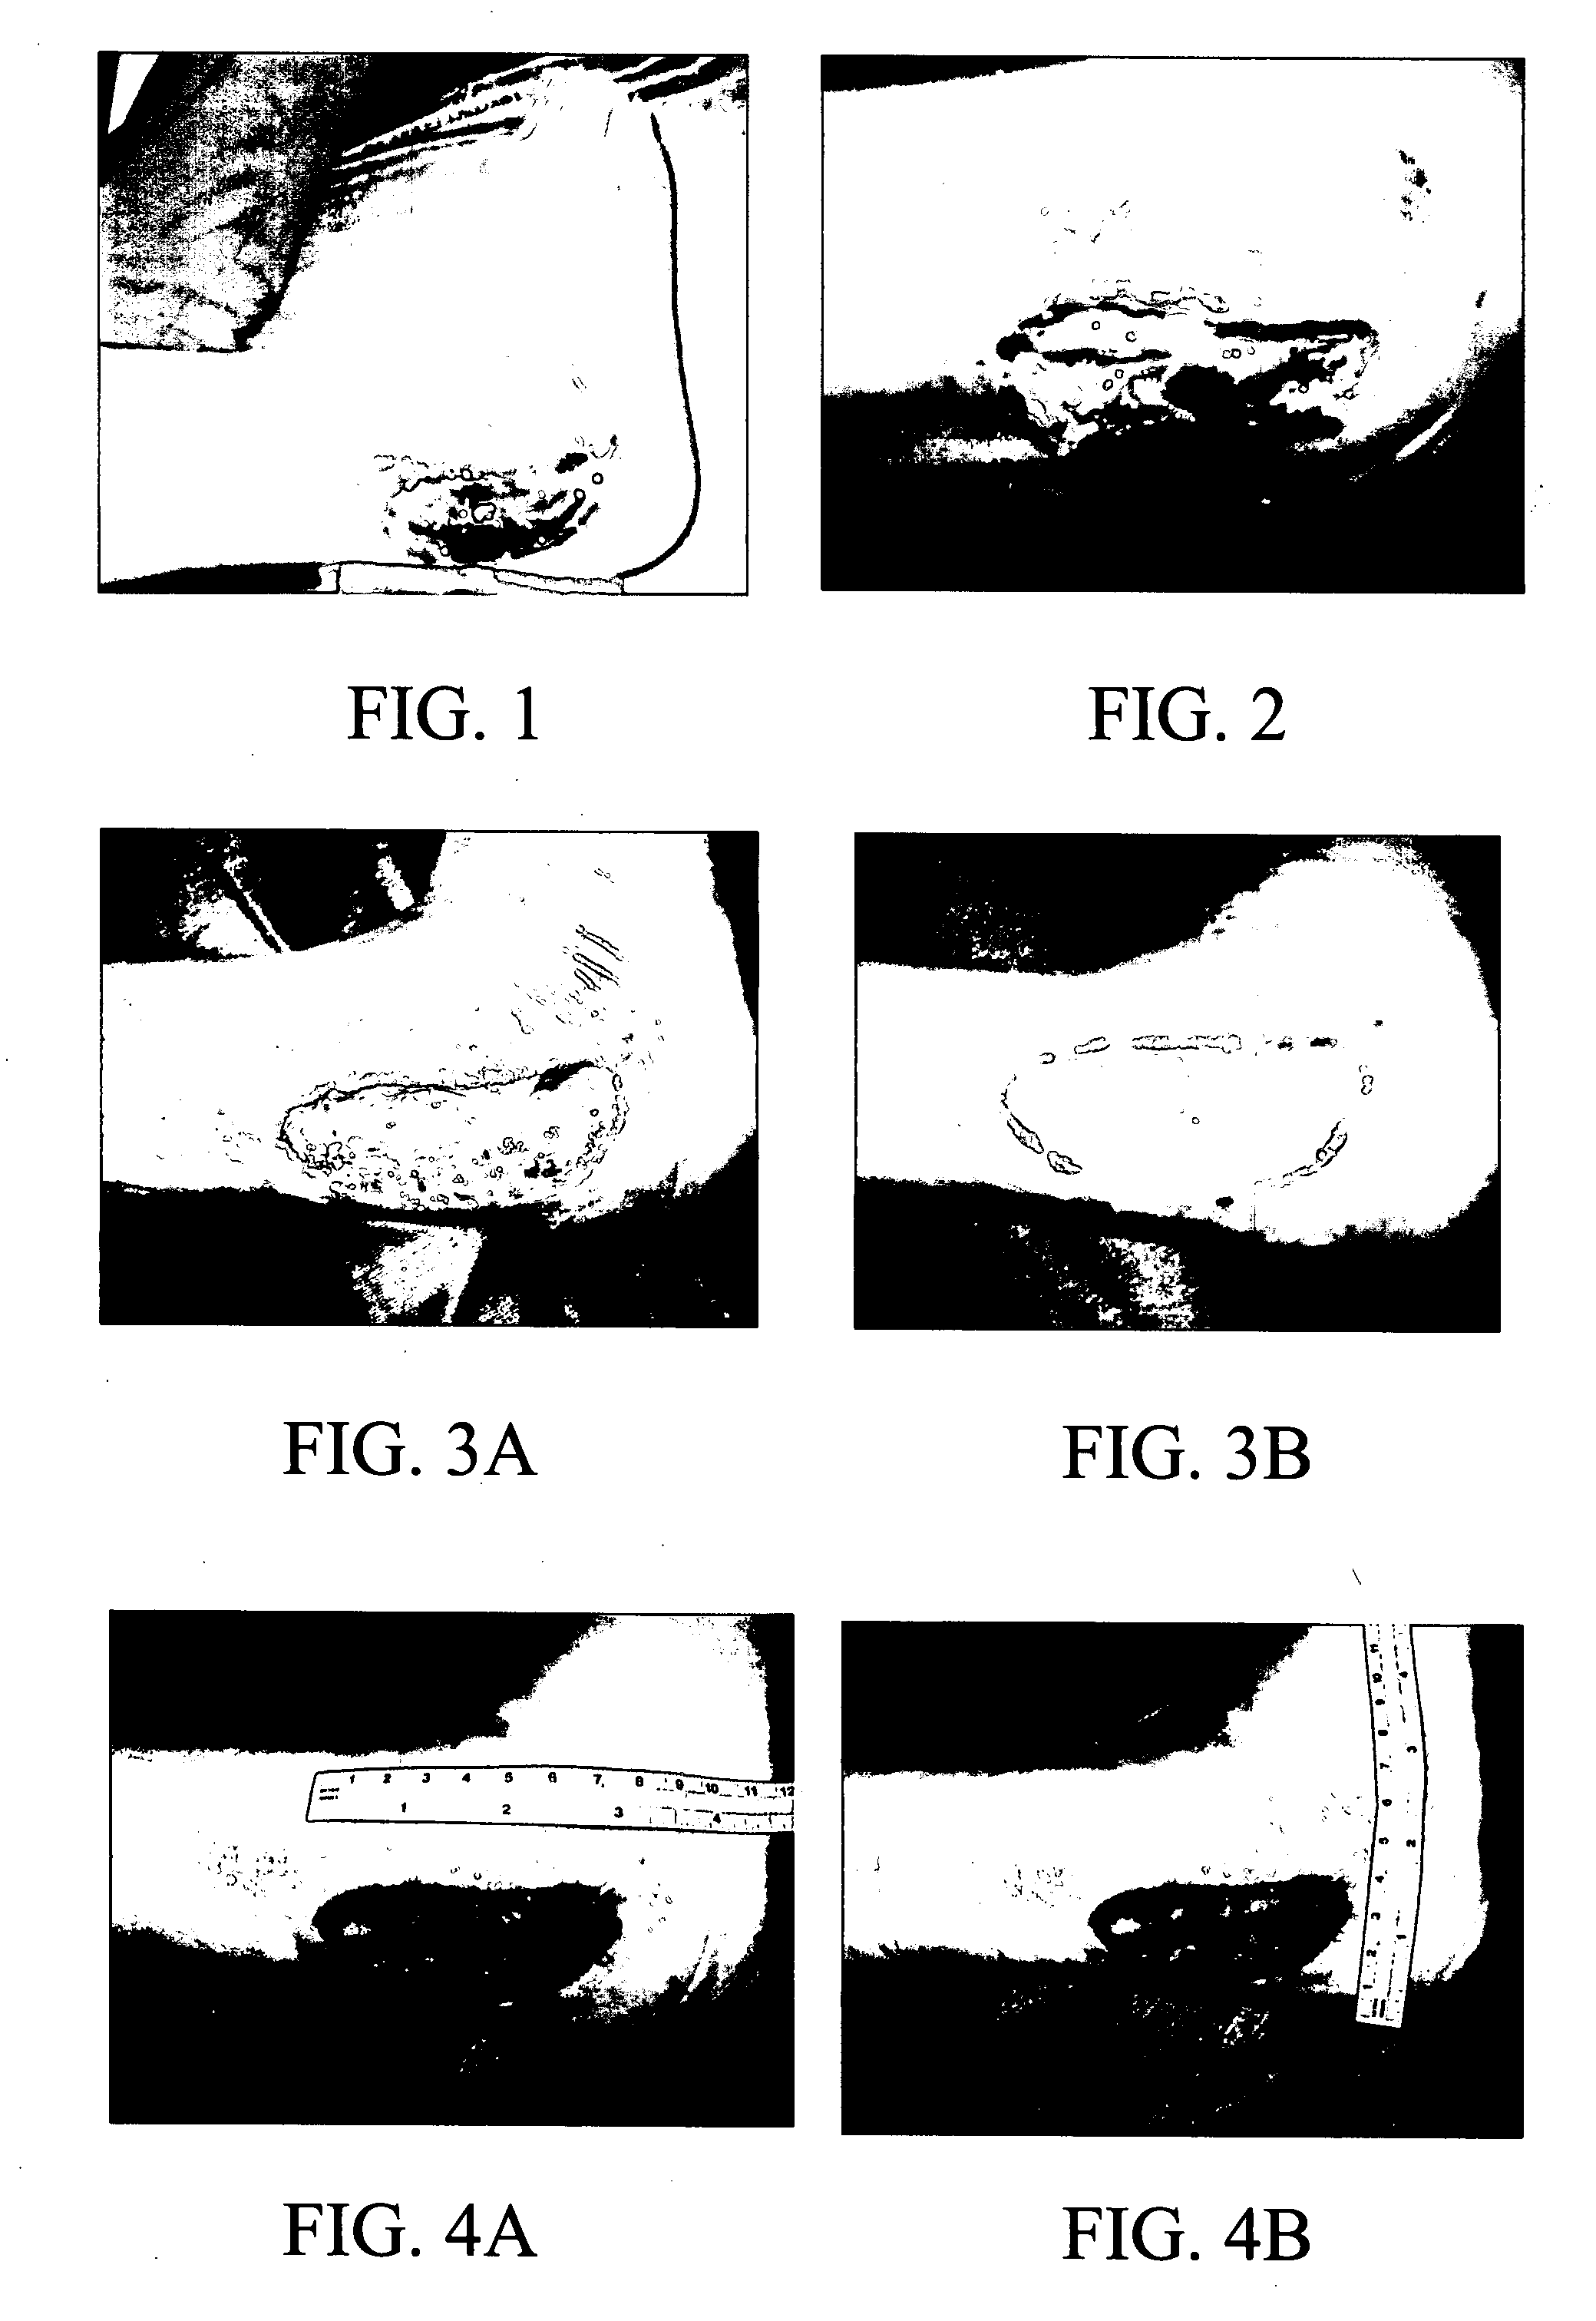 Materials and methods for wound treatment